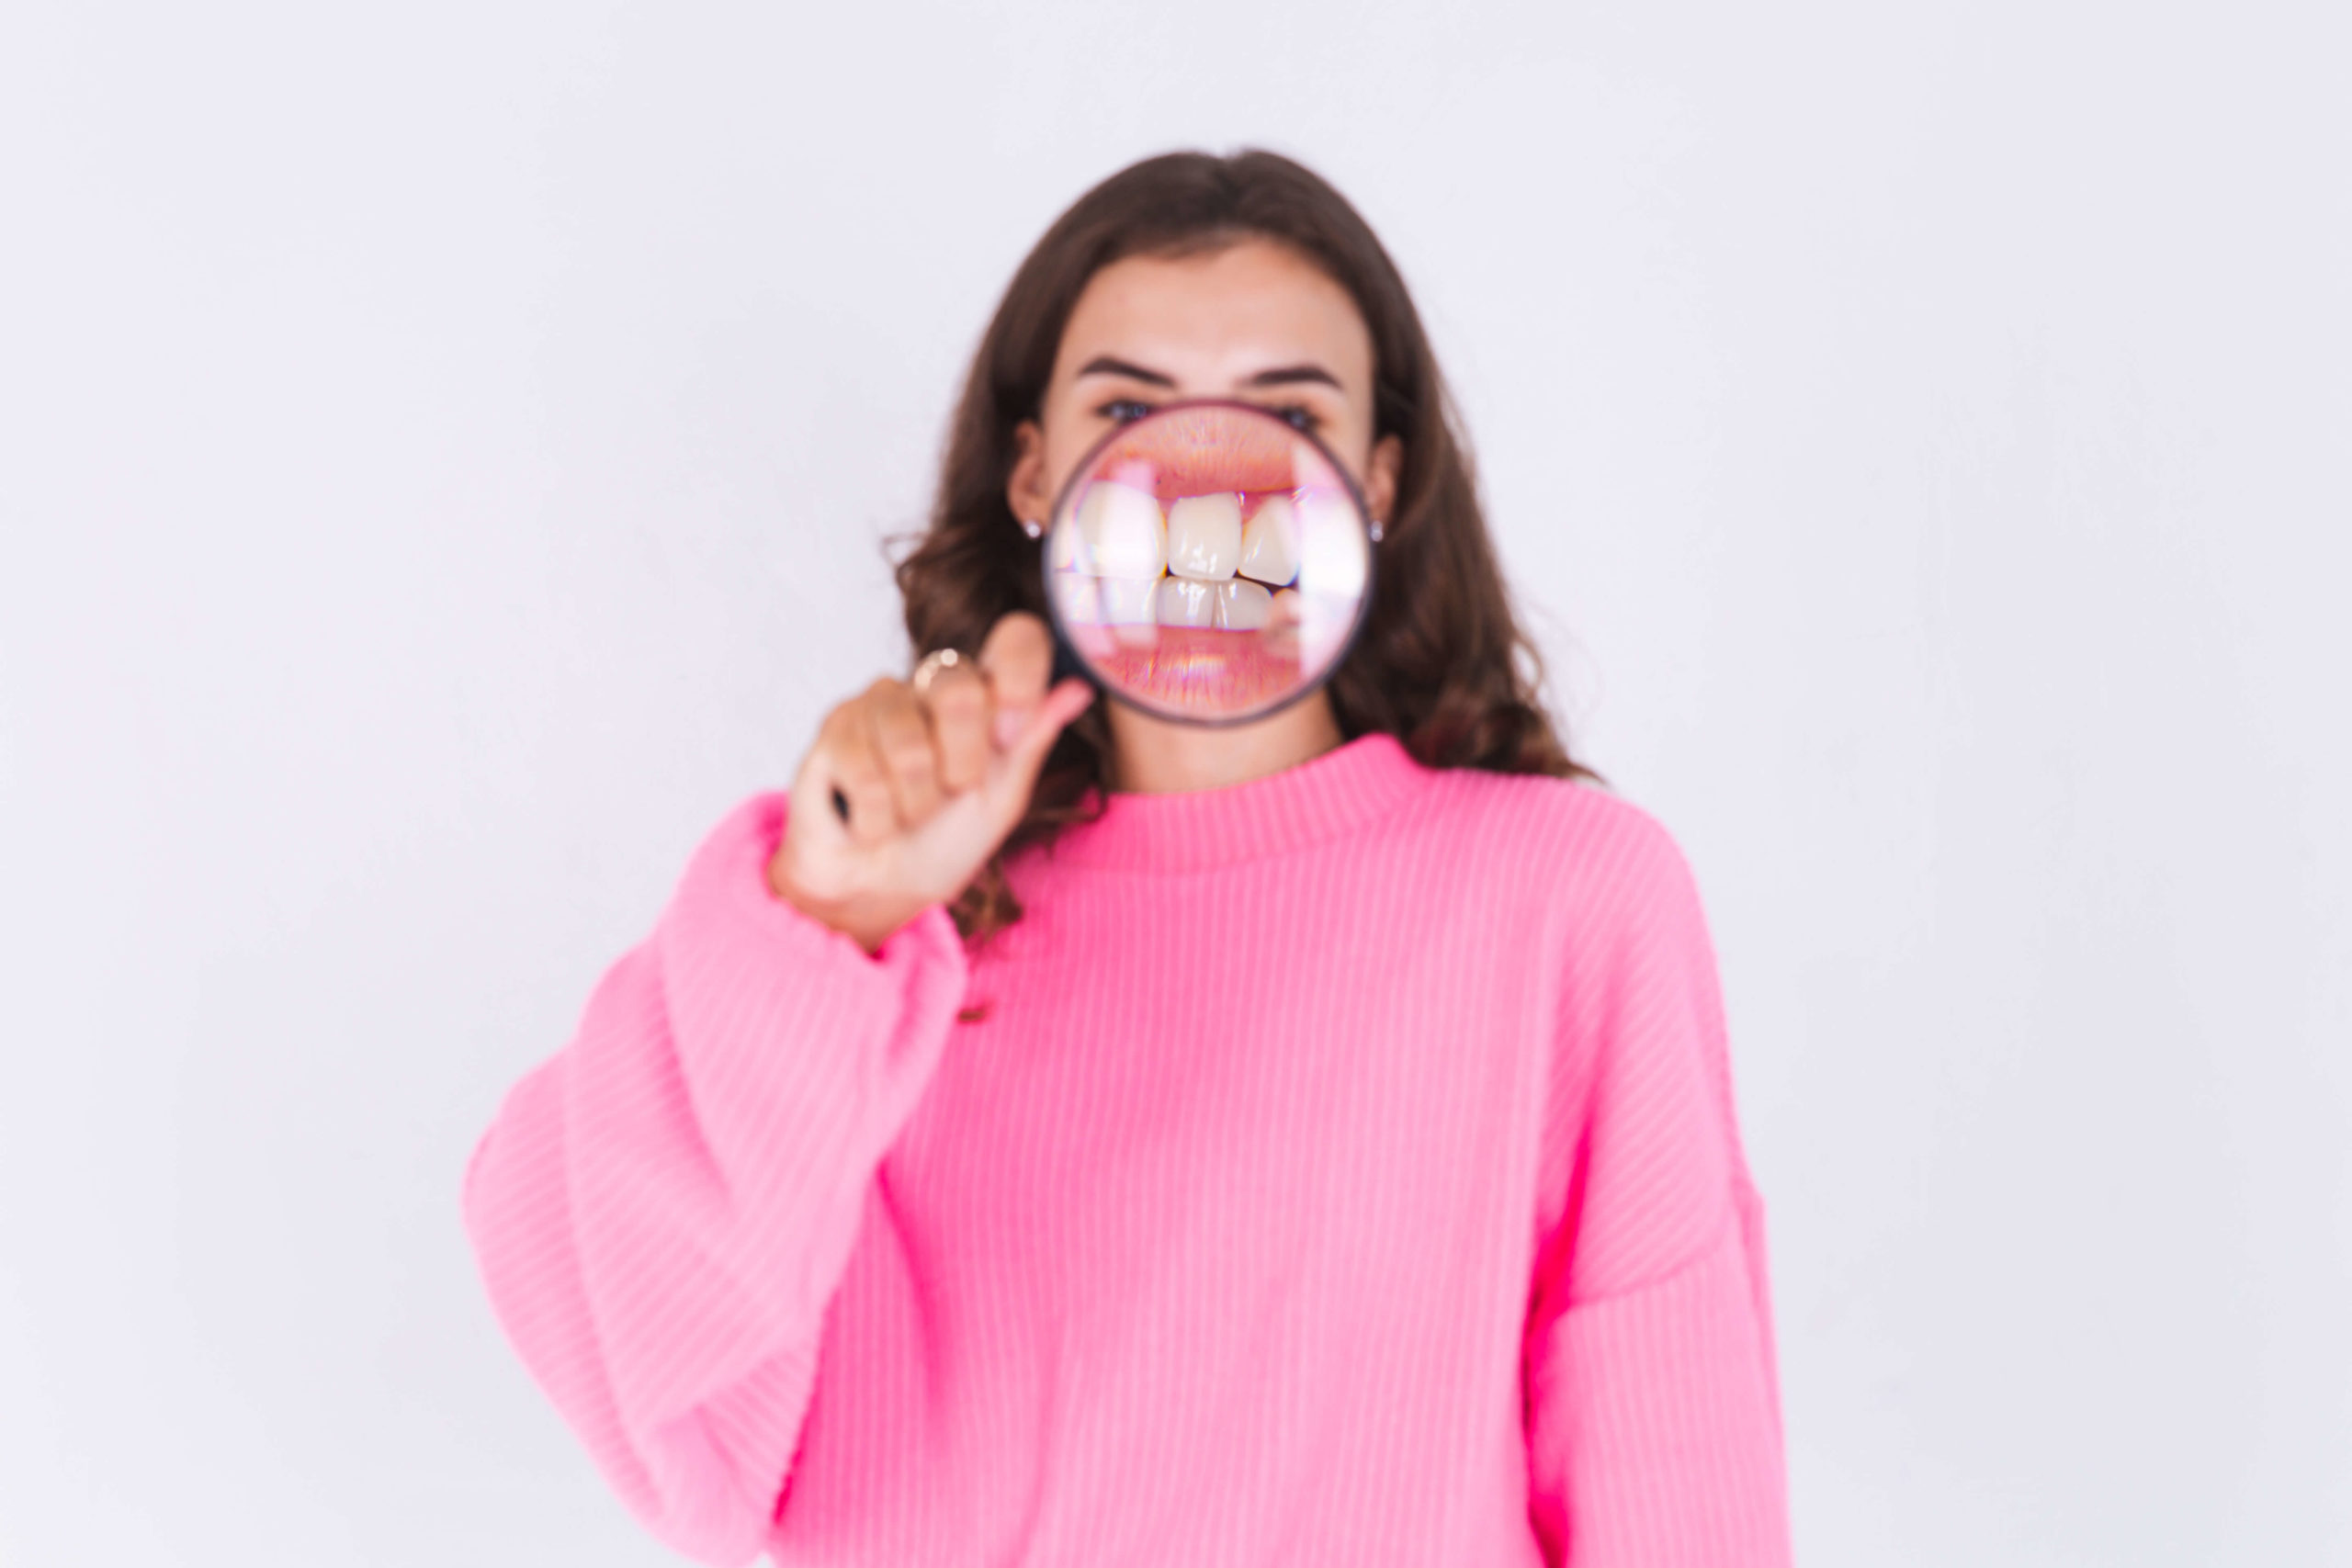 young beautiful woman with freckles light makeup sweater white wall with magnifier shows white teeth perfect smile 2 1 1 scaled - Myobrace: o tratamento que promete alinhar os dentes